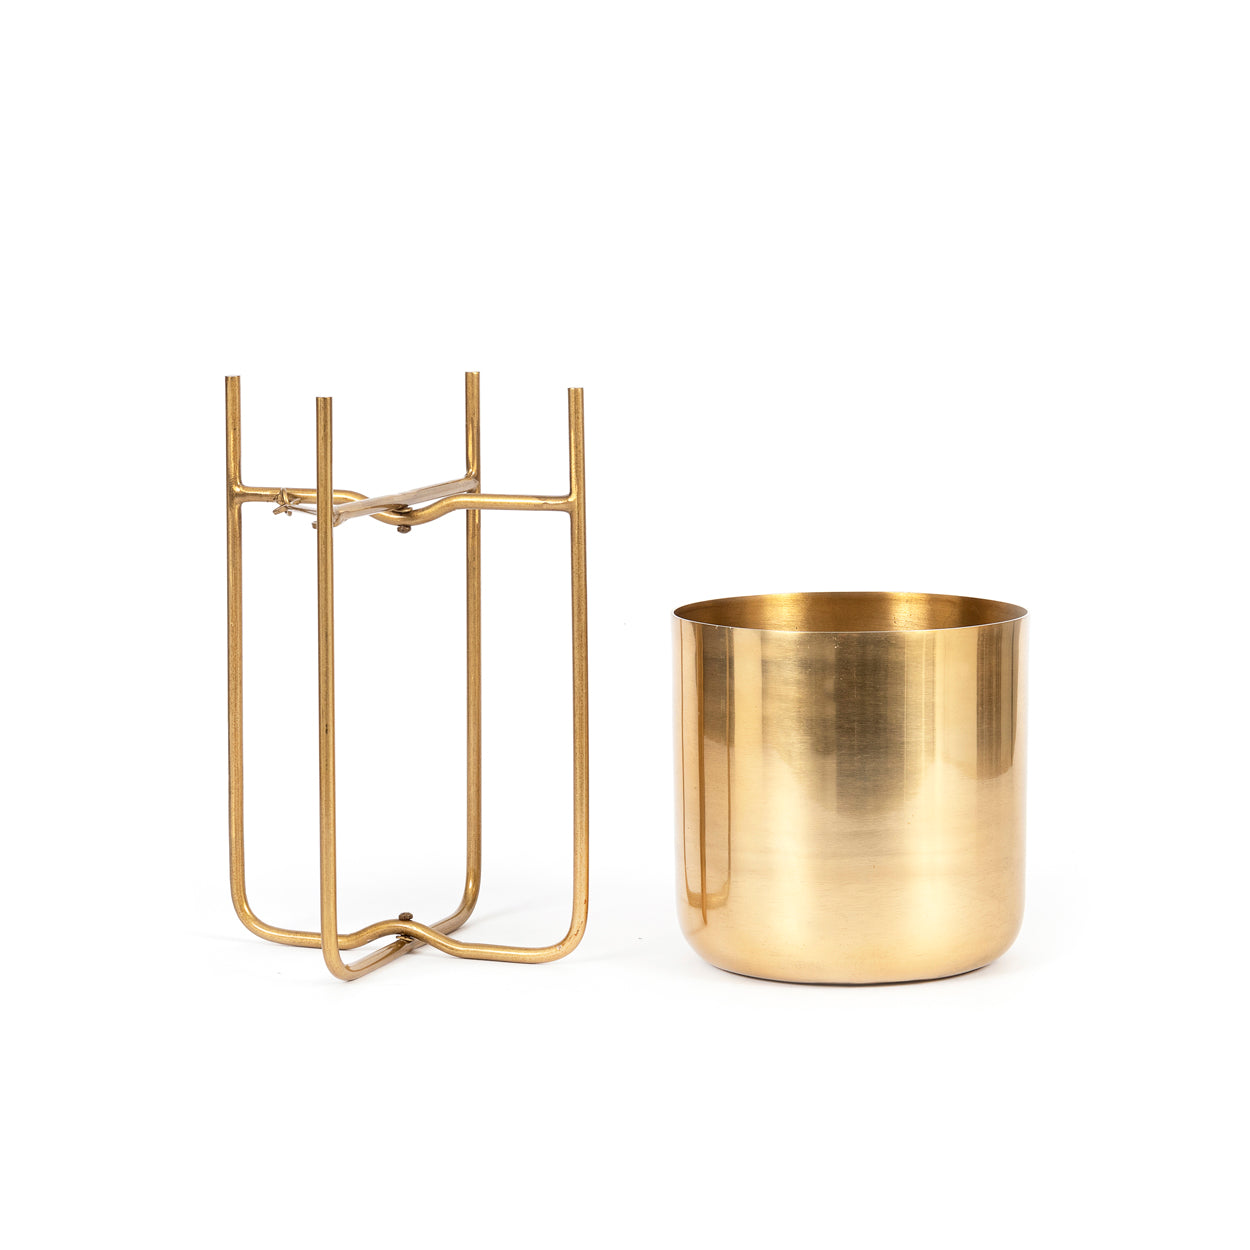 THE BRASS Planter On Stand unfolded